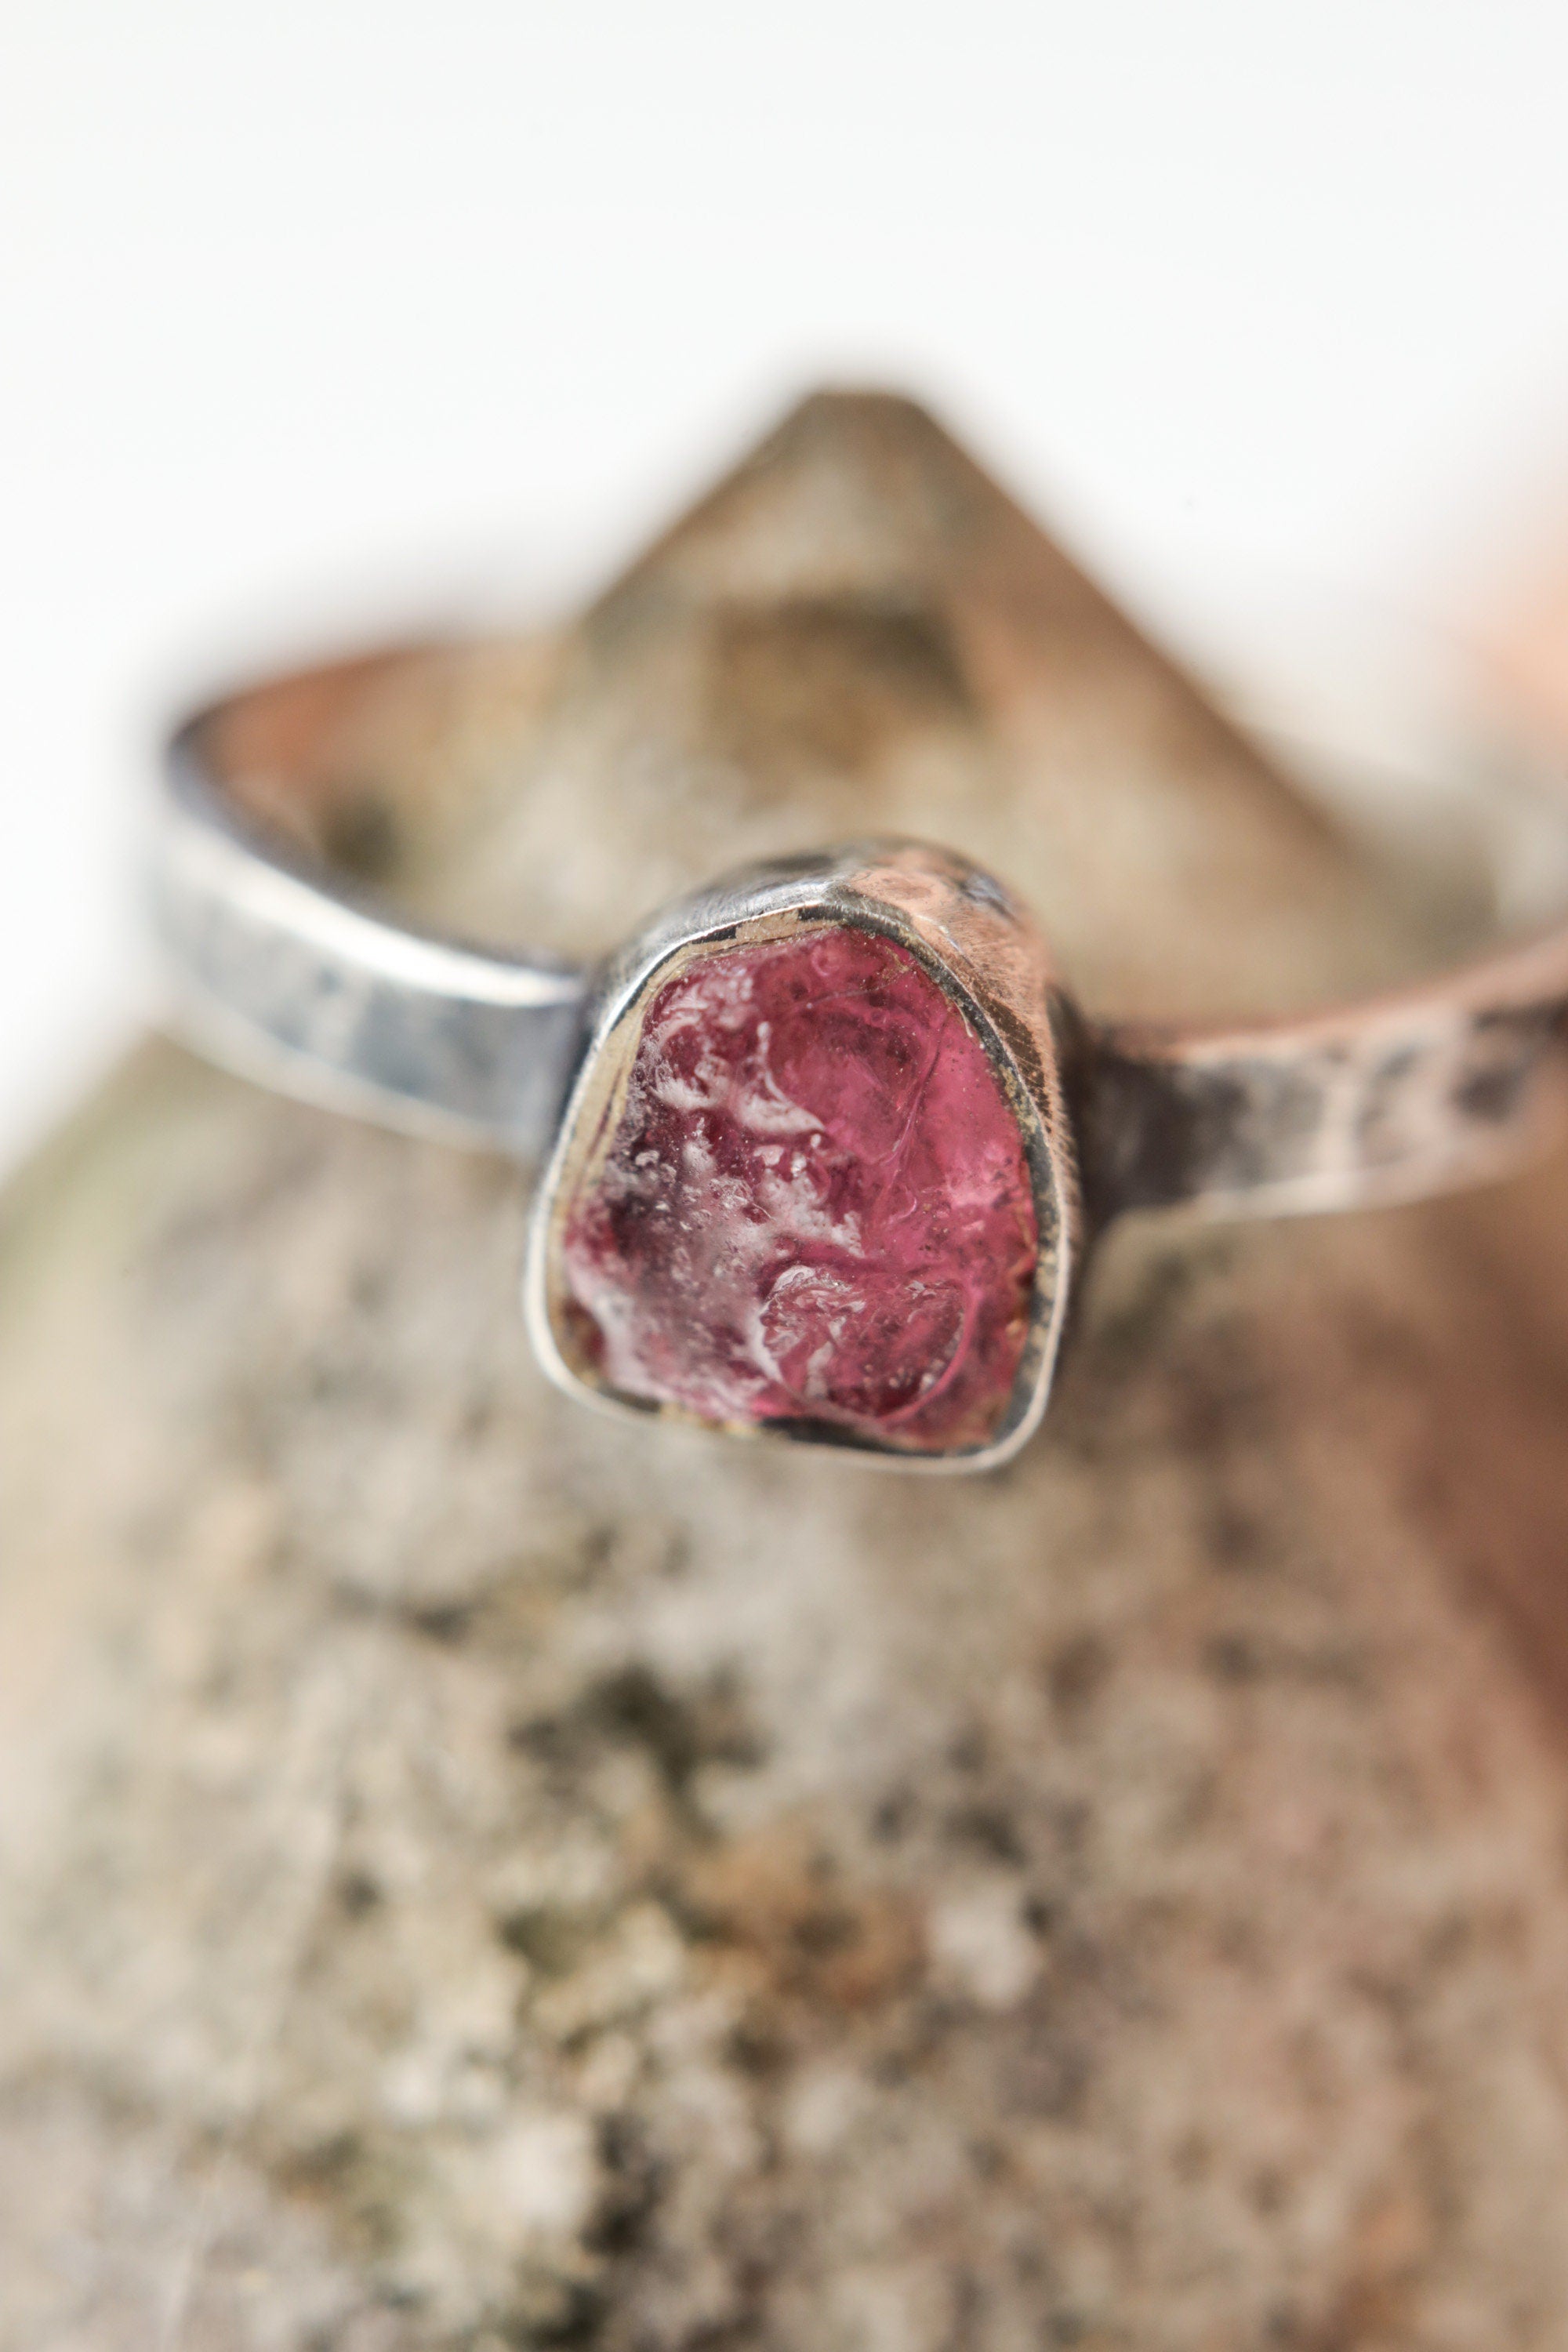 Eternal Blush - Sterling Silver Ring with Pink Tourmaline - Size 5 US - NO/10